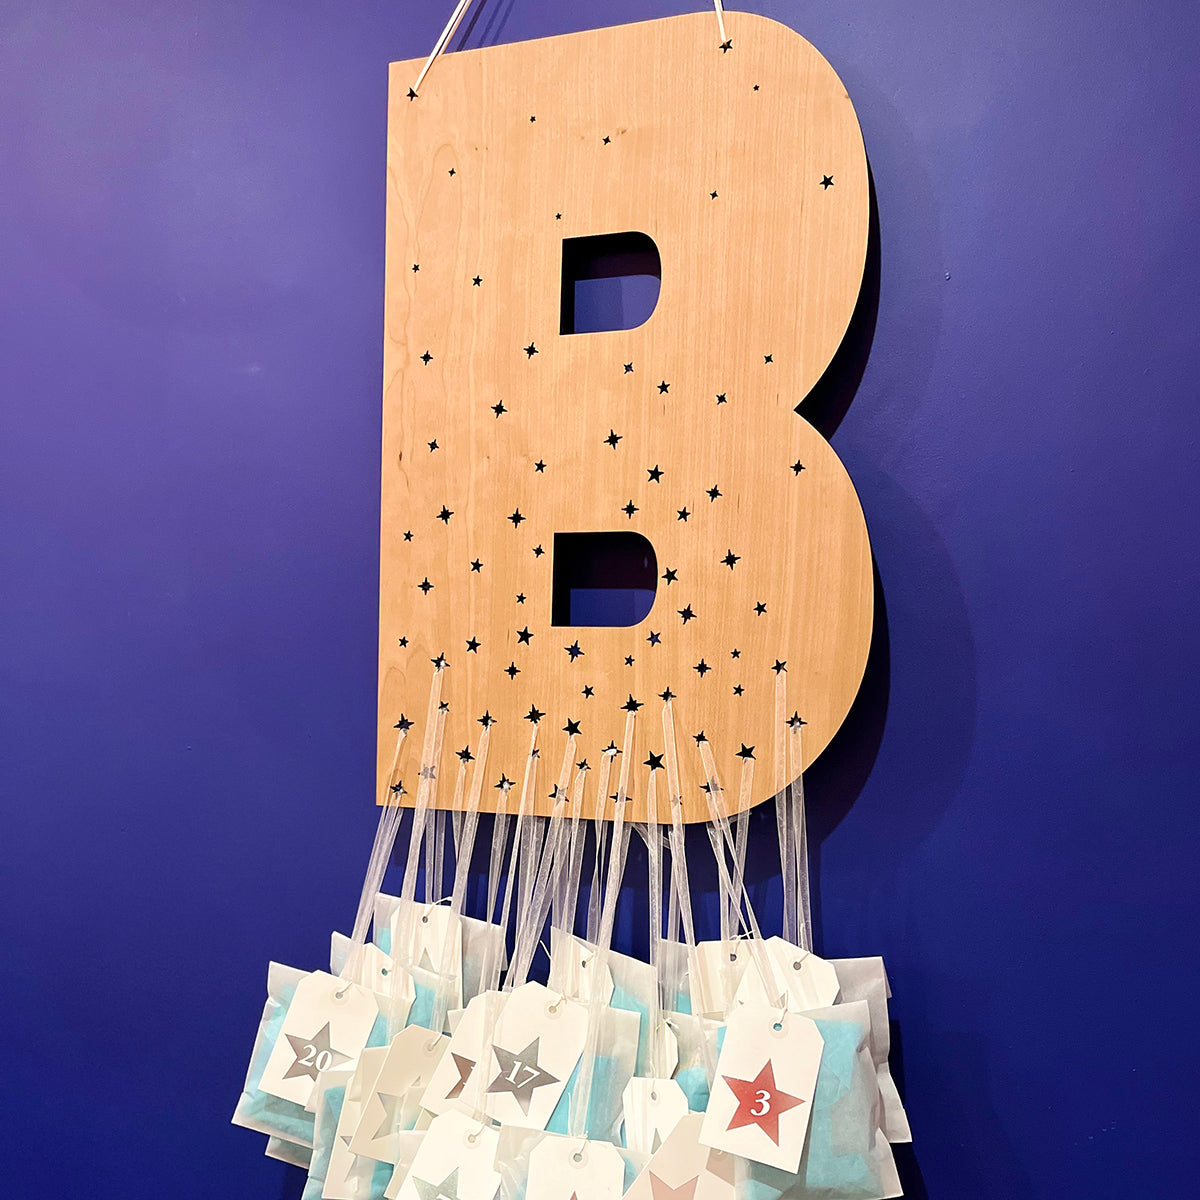 Large Natural Wooden Personalised Initial Advent Calendar